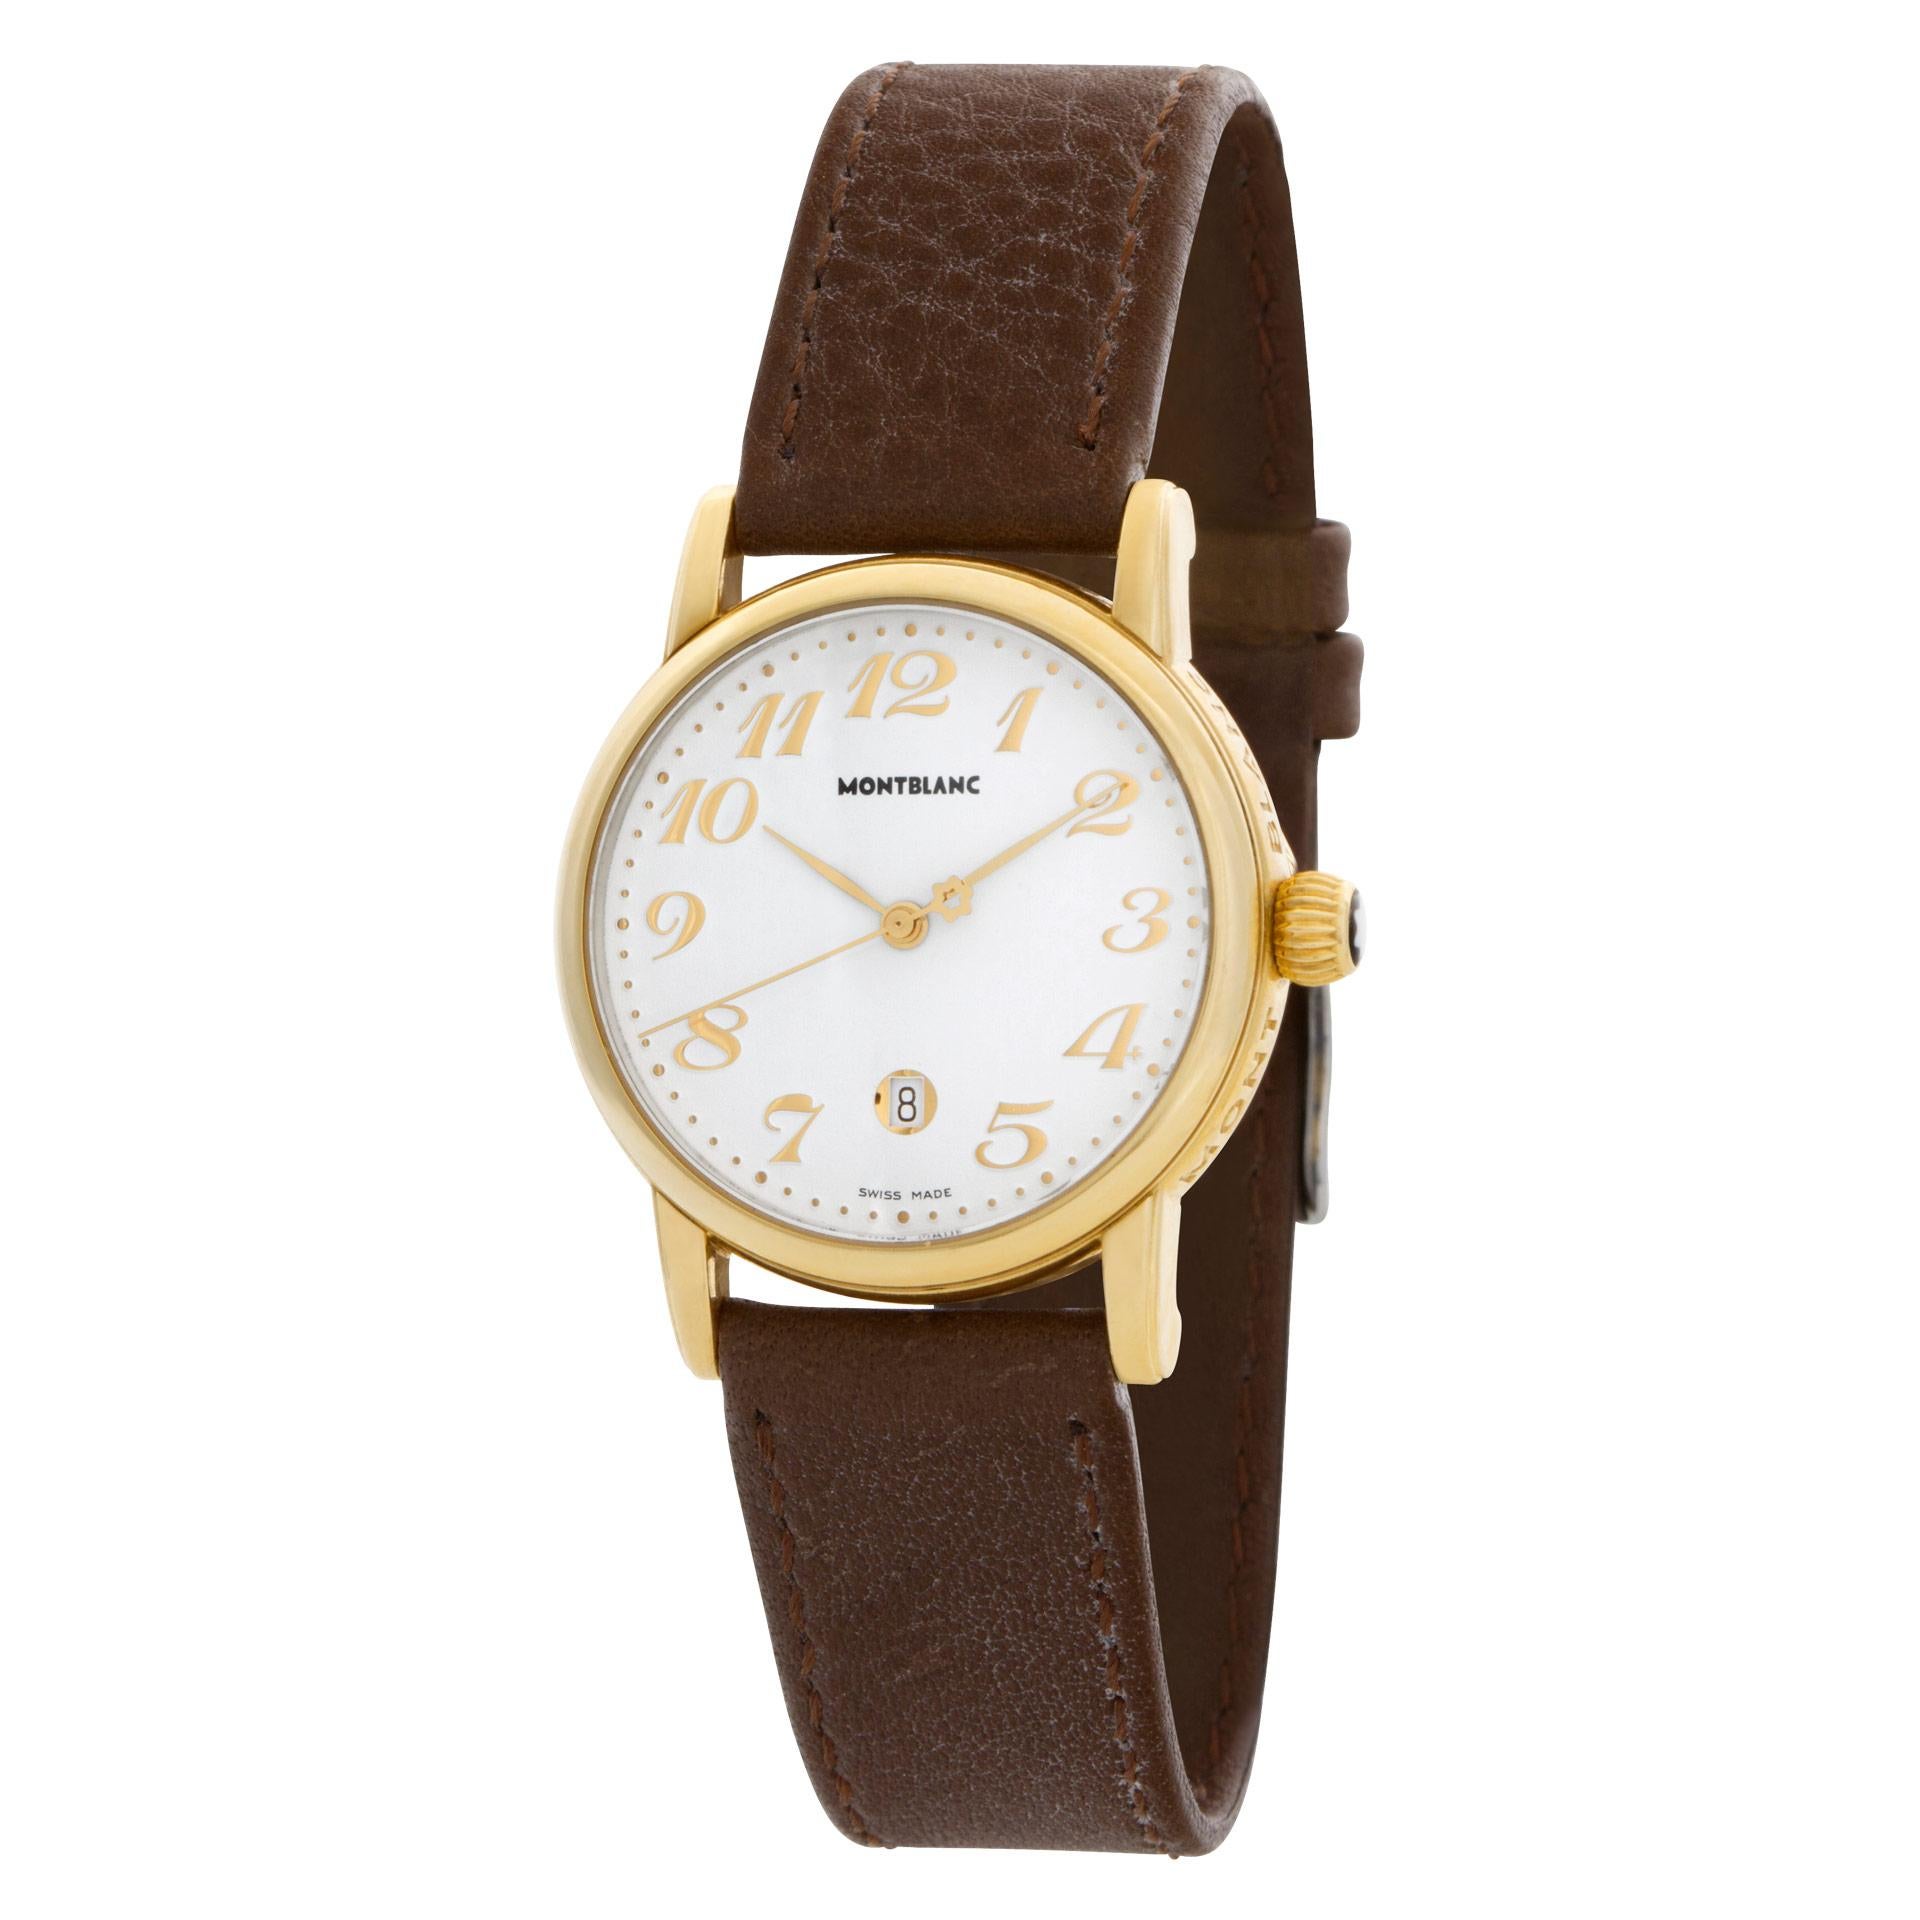 MontBlanc Meisterstuck watch in 18k on leather strap. Quartz w/ sweep seconds and date. 31 mm case size. Ref 7008. Fine Pre-owned MontBlanc Watch.

 Certified preowned Classic MontBlanc Meisterstuck 7008 watch is made out of yellow gold on a Brown